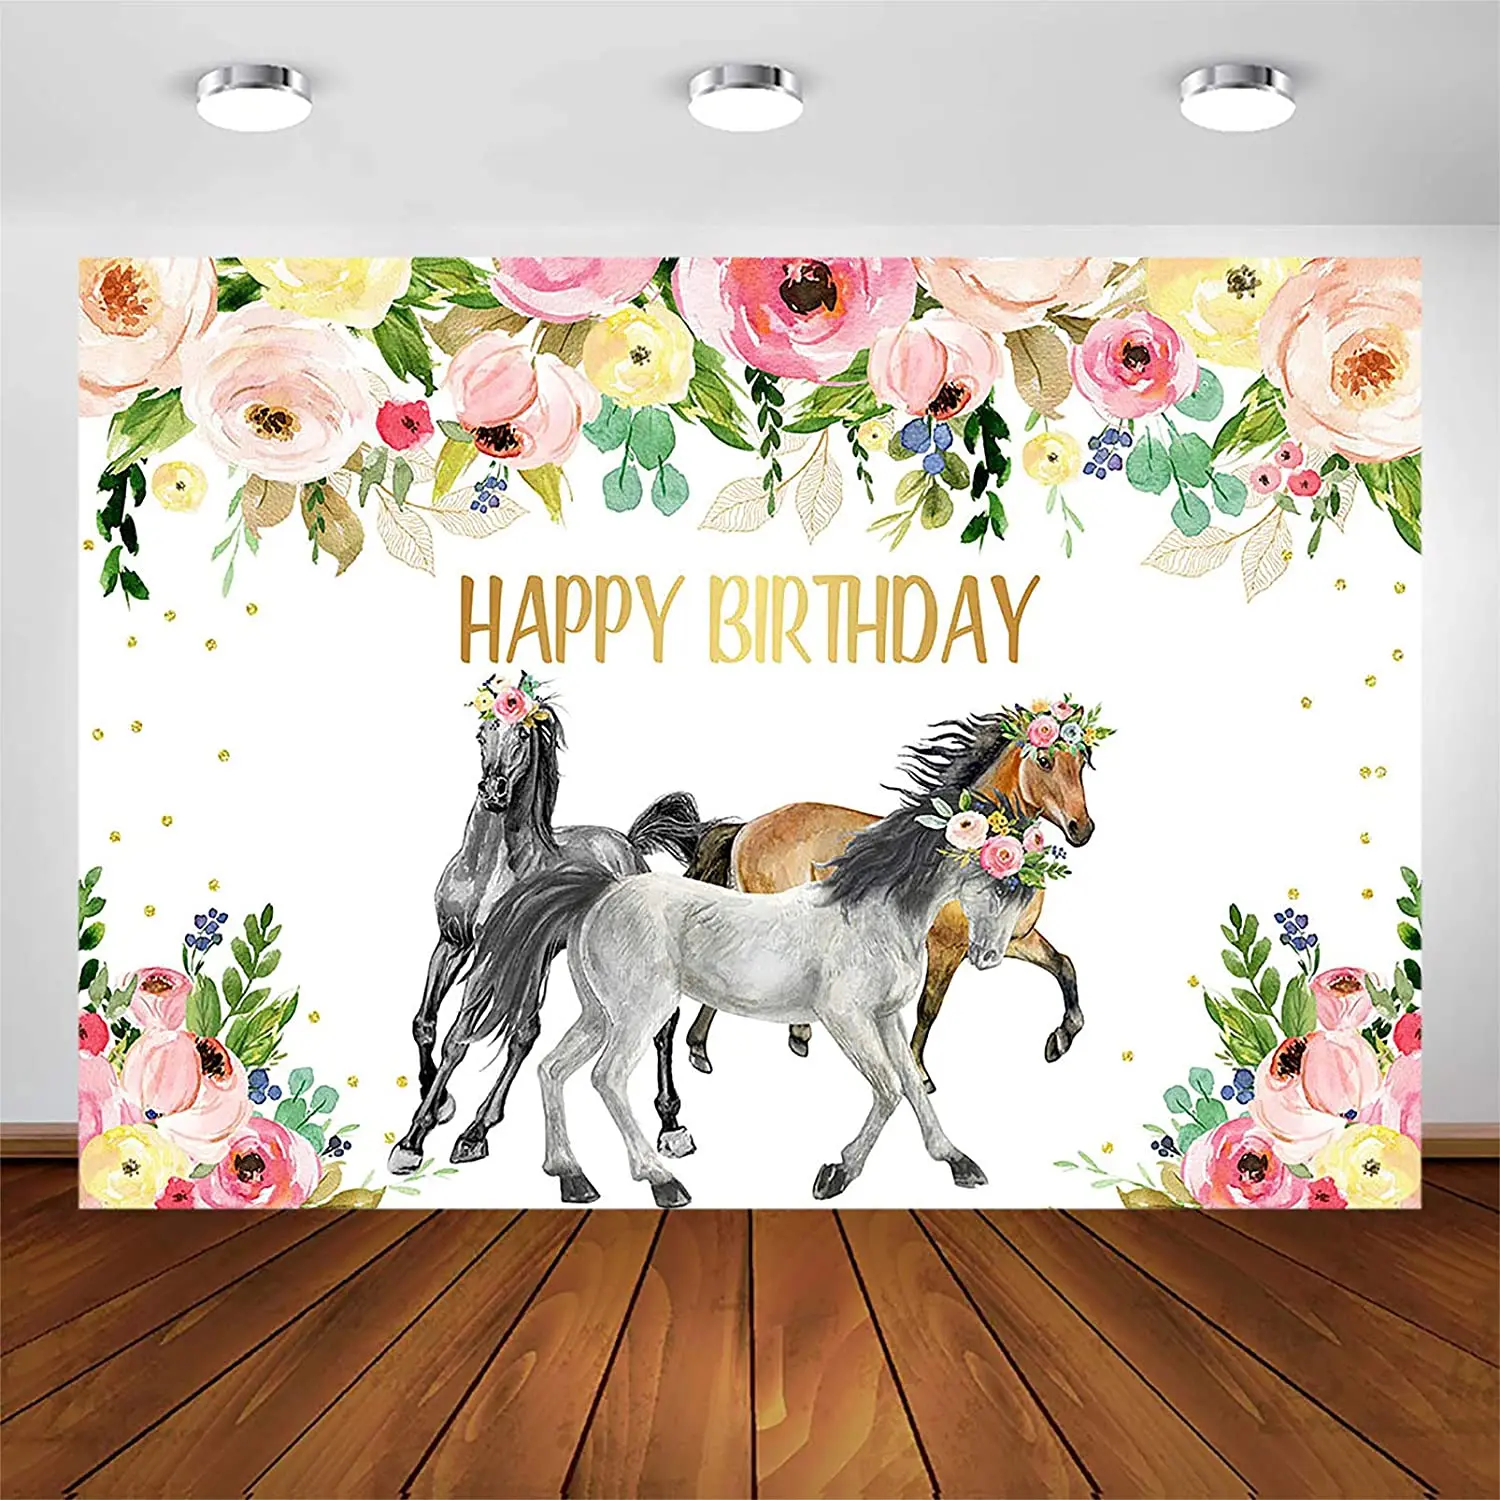 Horse Birthday Party Backdrop for Girls 7x5ft Cowgirl Western Horse Party Photography Background Decorations Banner Photo Booth